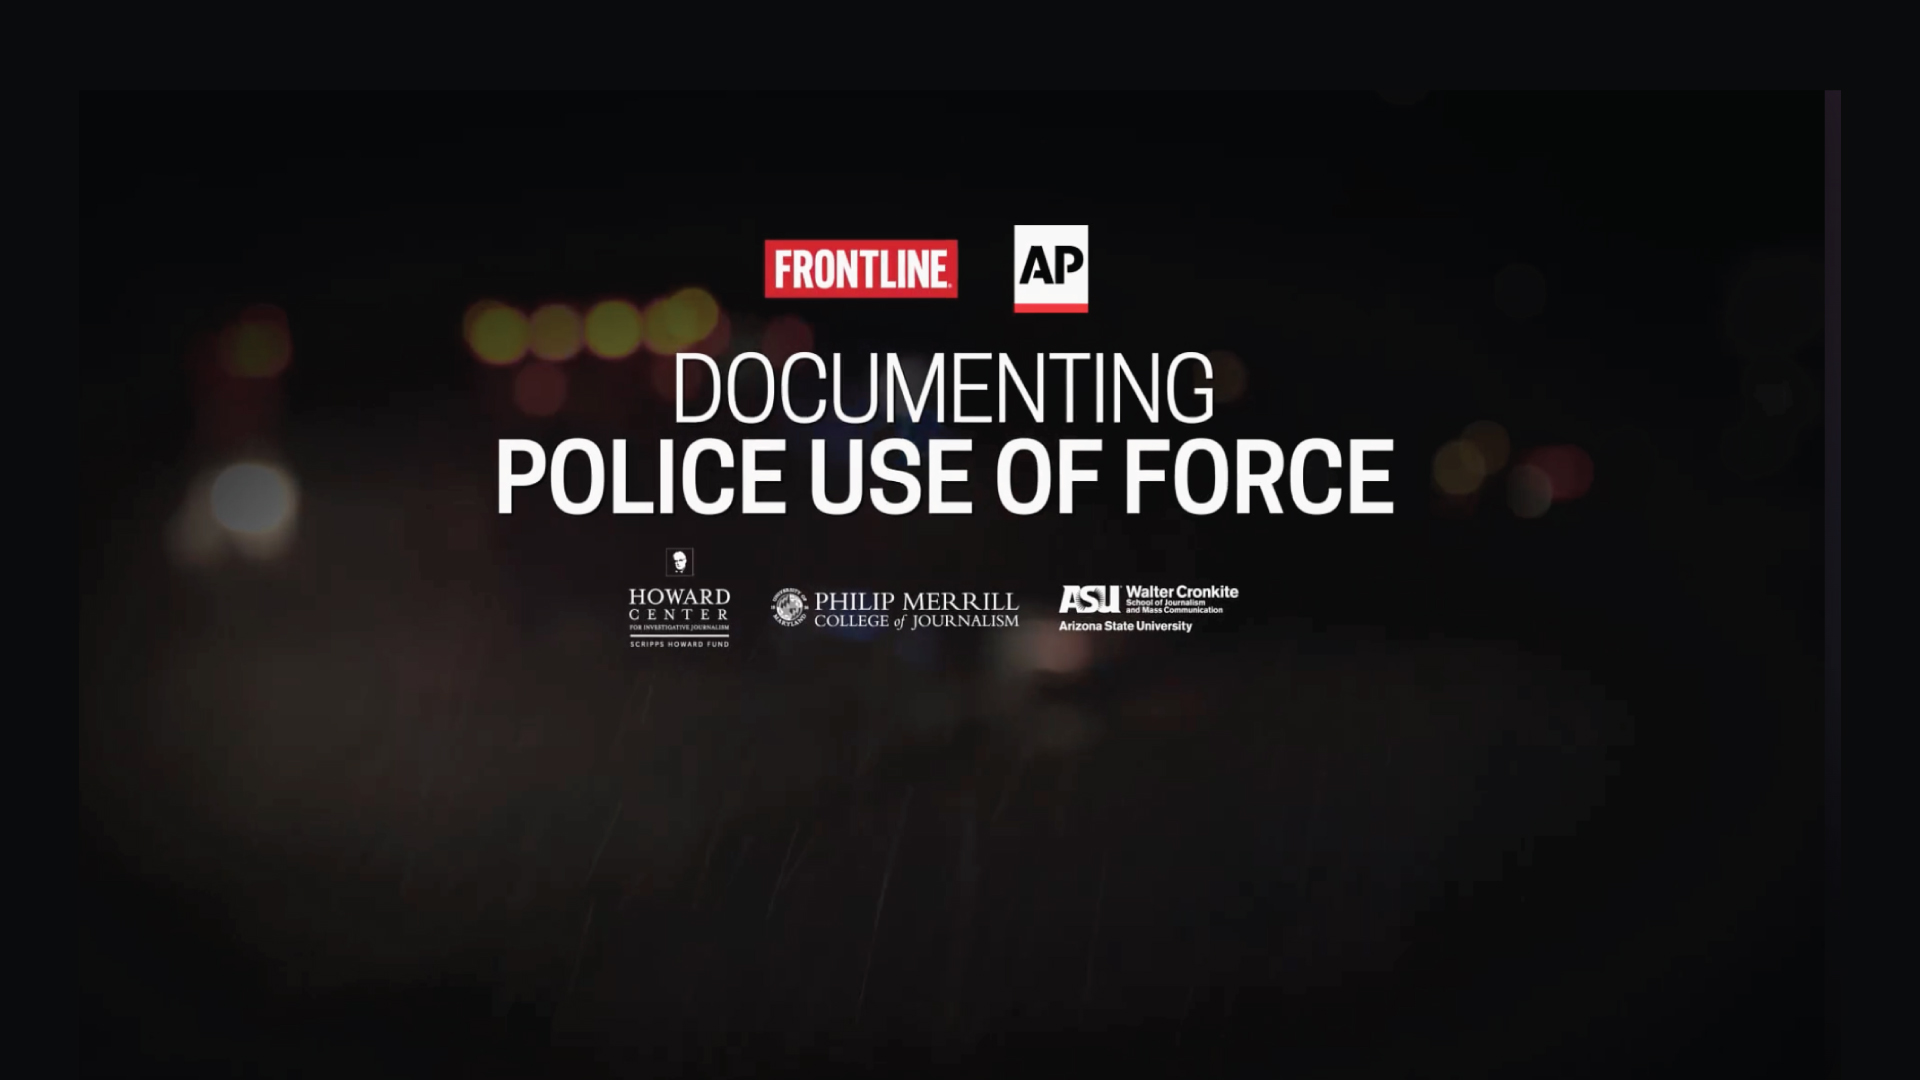 FRONTLINE <br/>DOCUMENTING POLICE USE OF FORCE